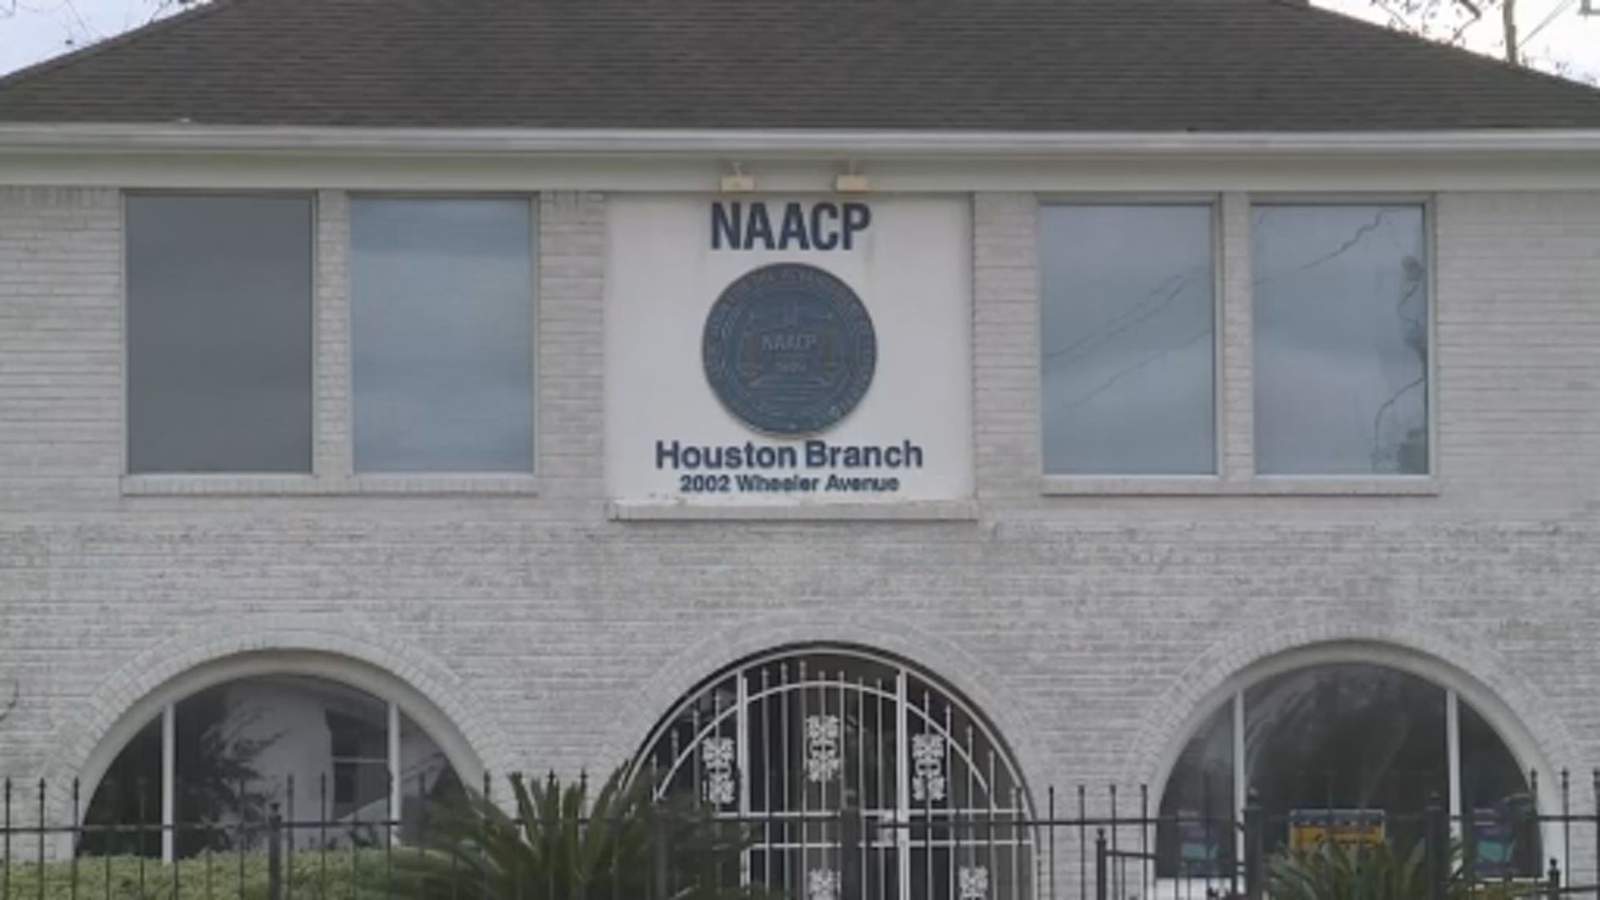 NAACP Houston Branch hosts COVID-19 vaccine town hall